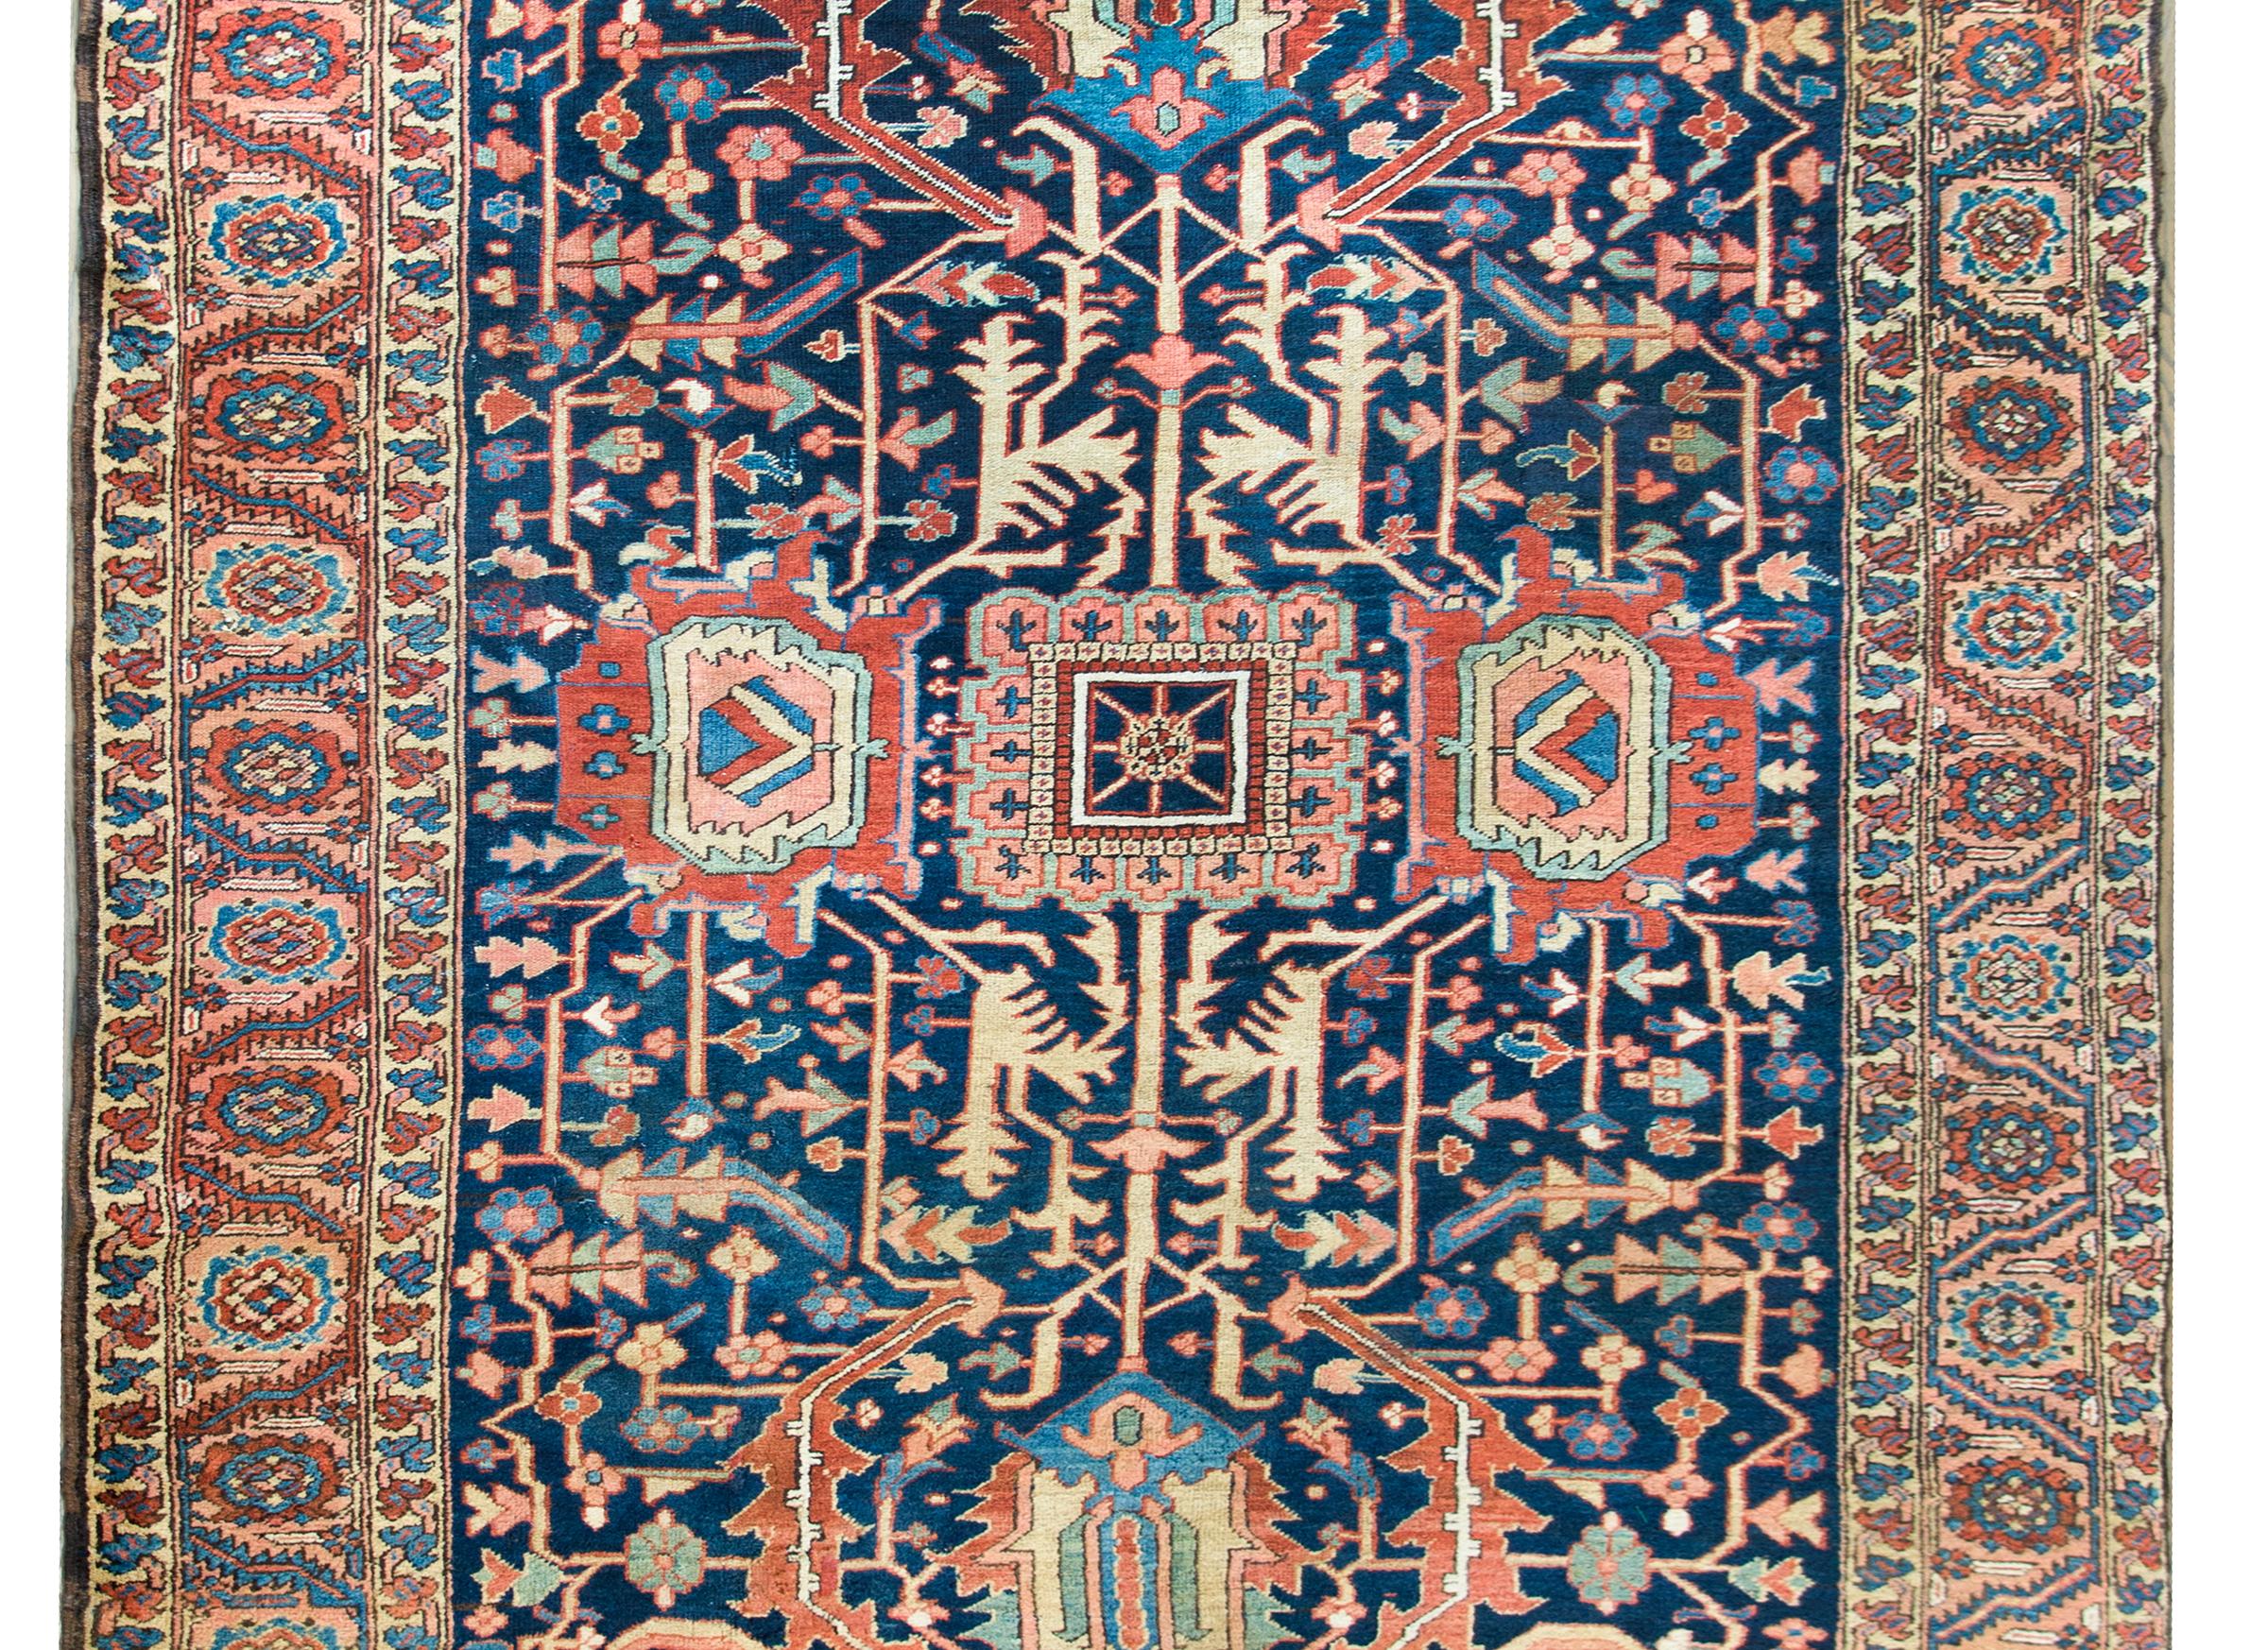 A rare and gorgeous early 20th century Persian Heriz rug with an unusual pattern containing two different large-scale stylized flowers connected with scrolling vines and living amidst a field of densely woven stylized vines and flowers, and all